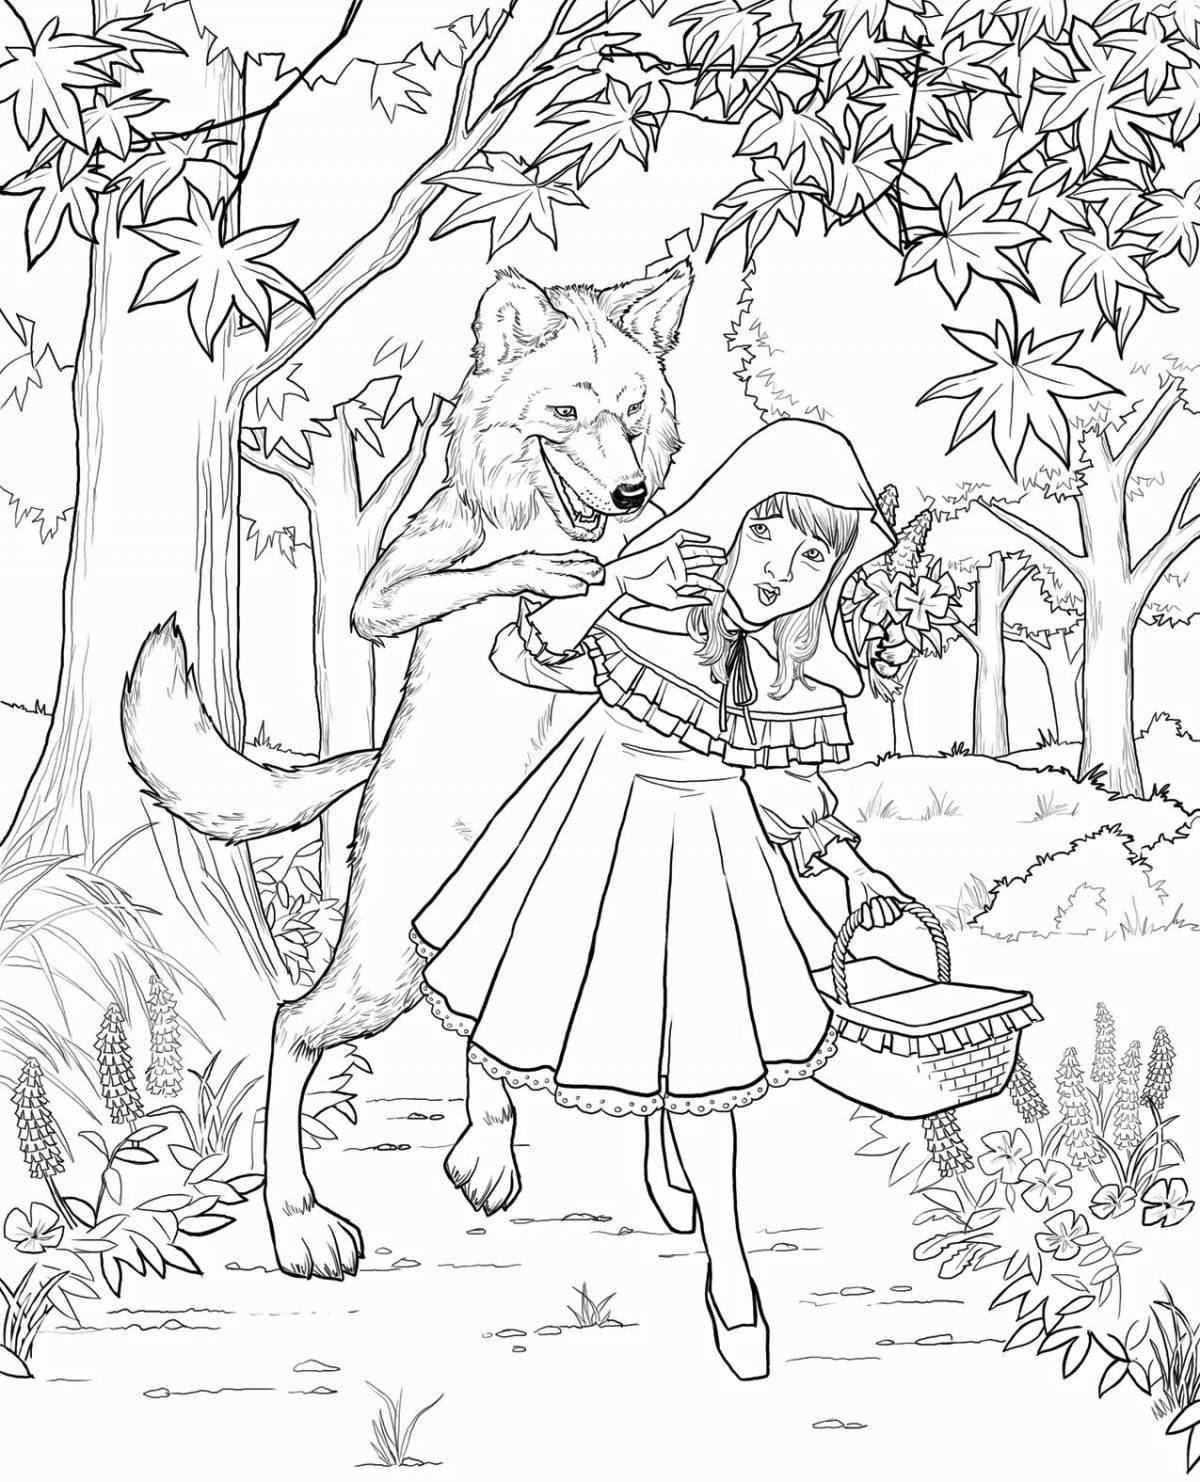 Coloring book cheerful gray wolf and little red riding hood